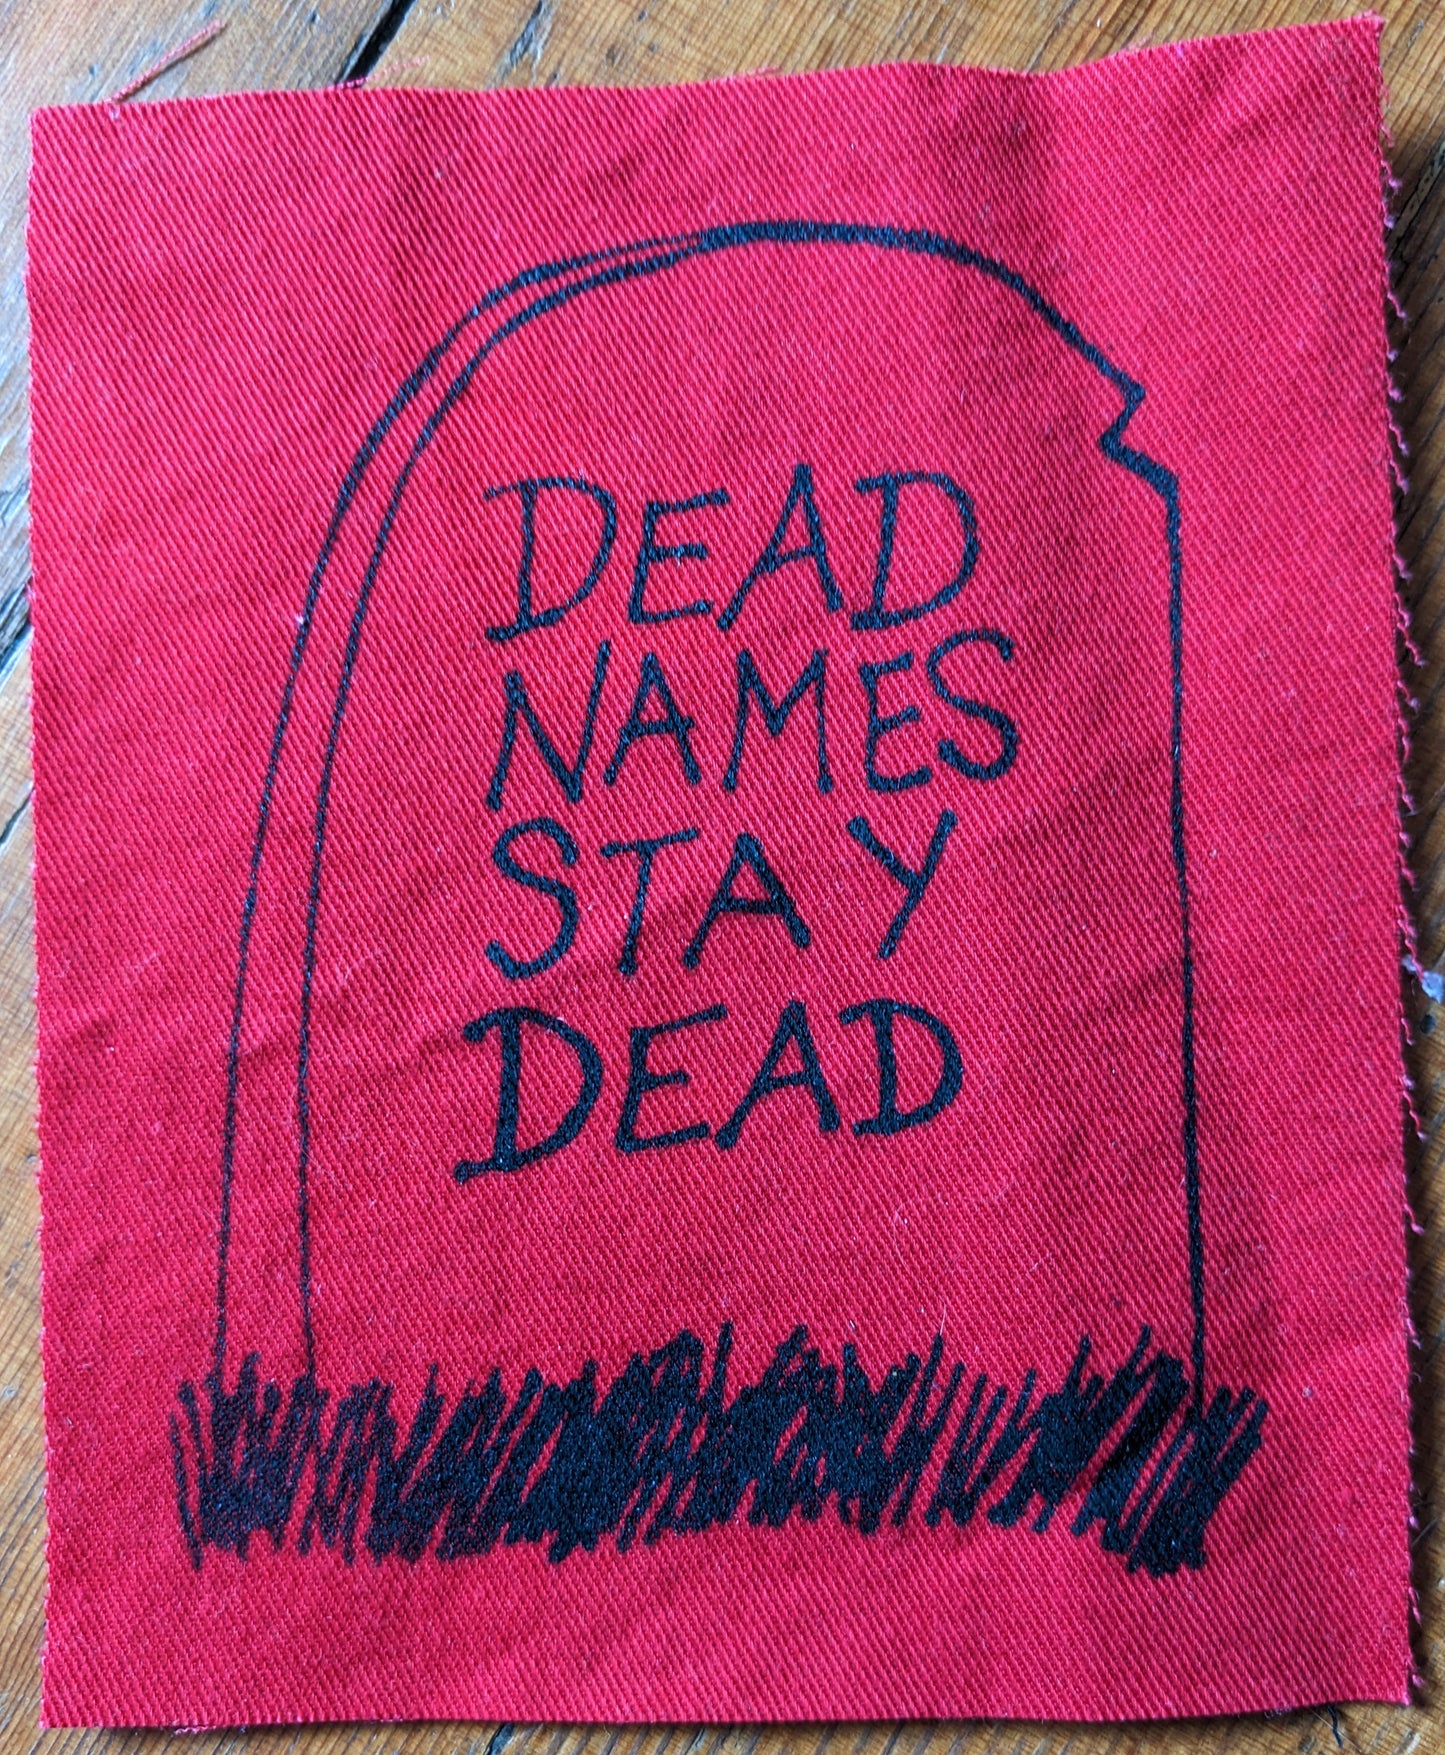 Dead Names Stay Dead Patch